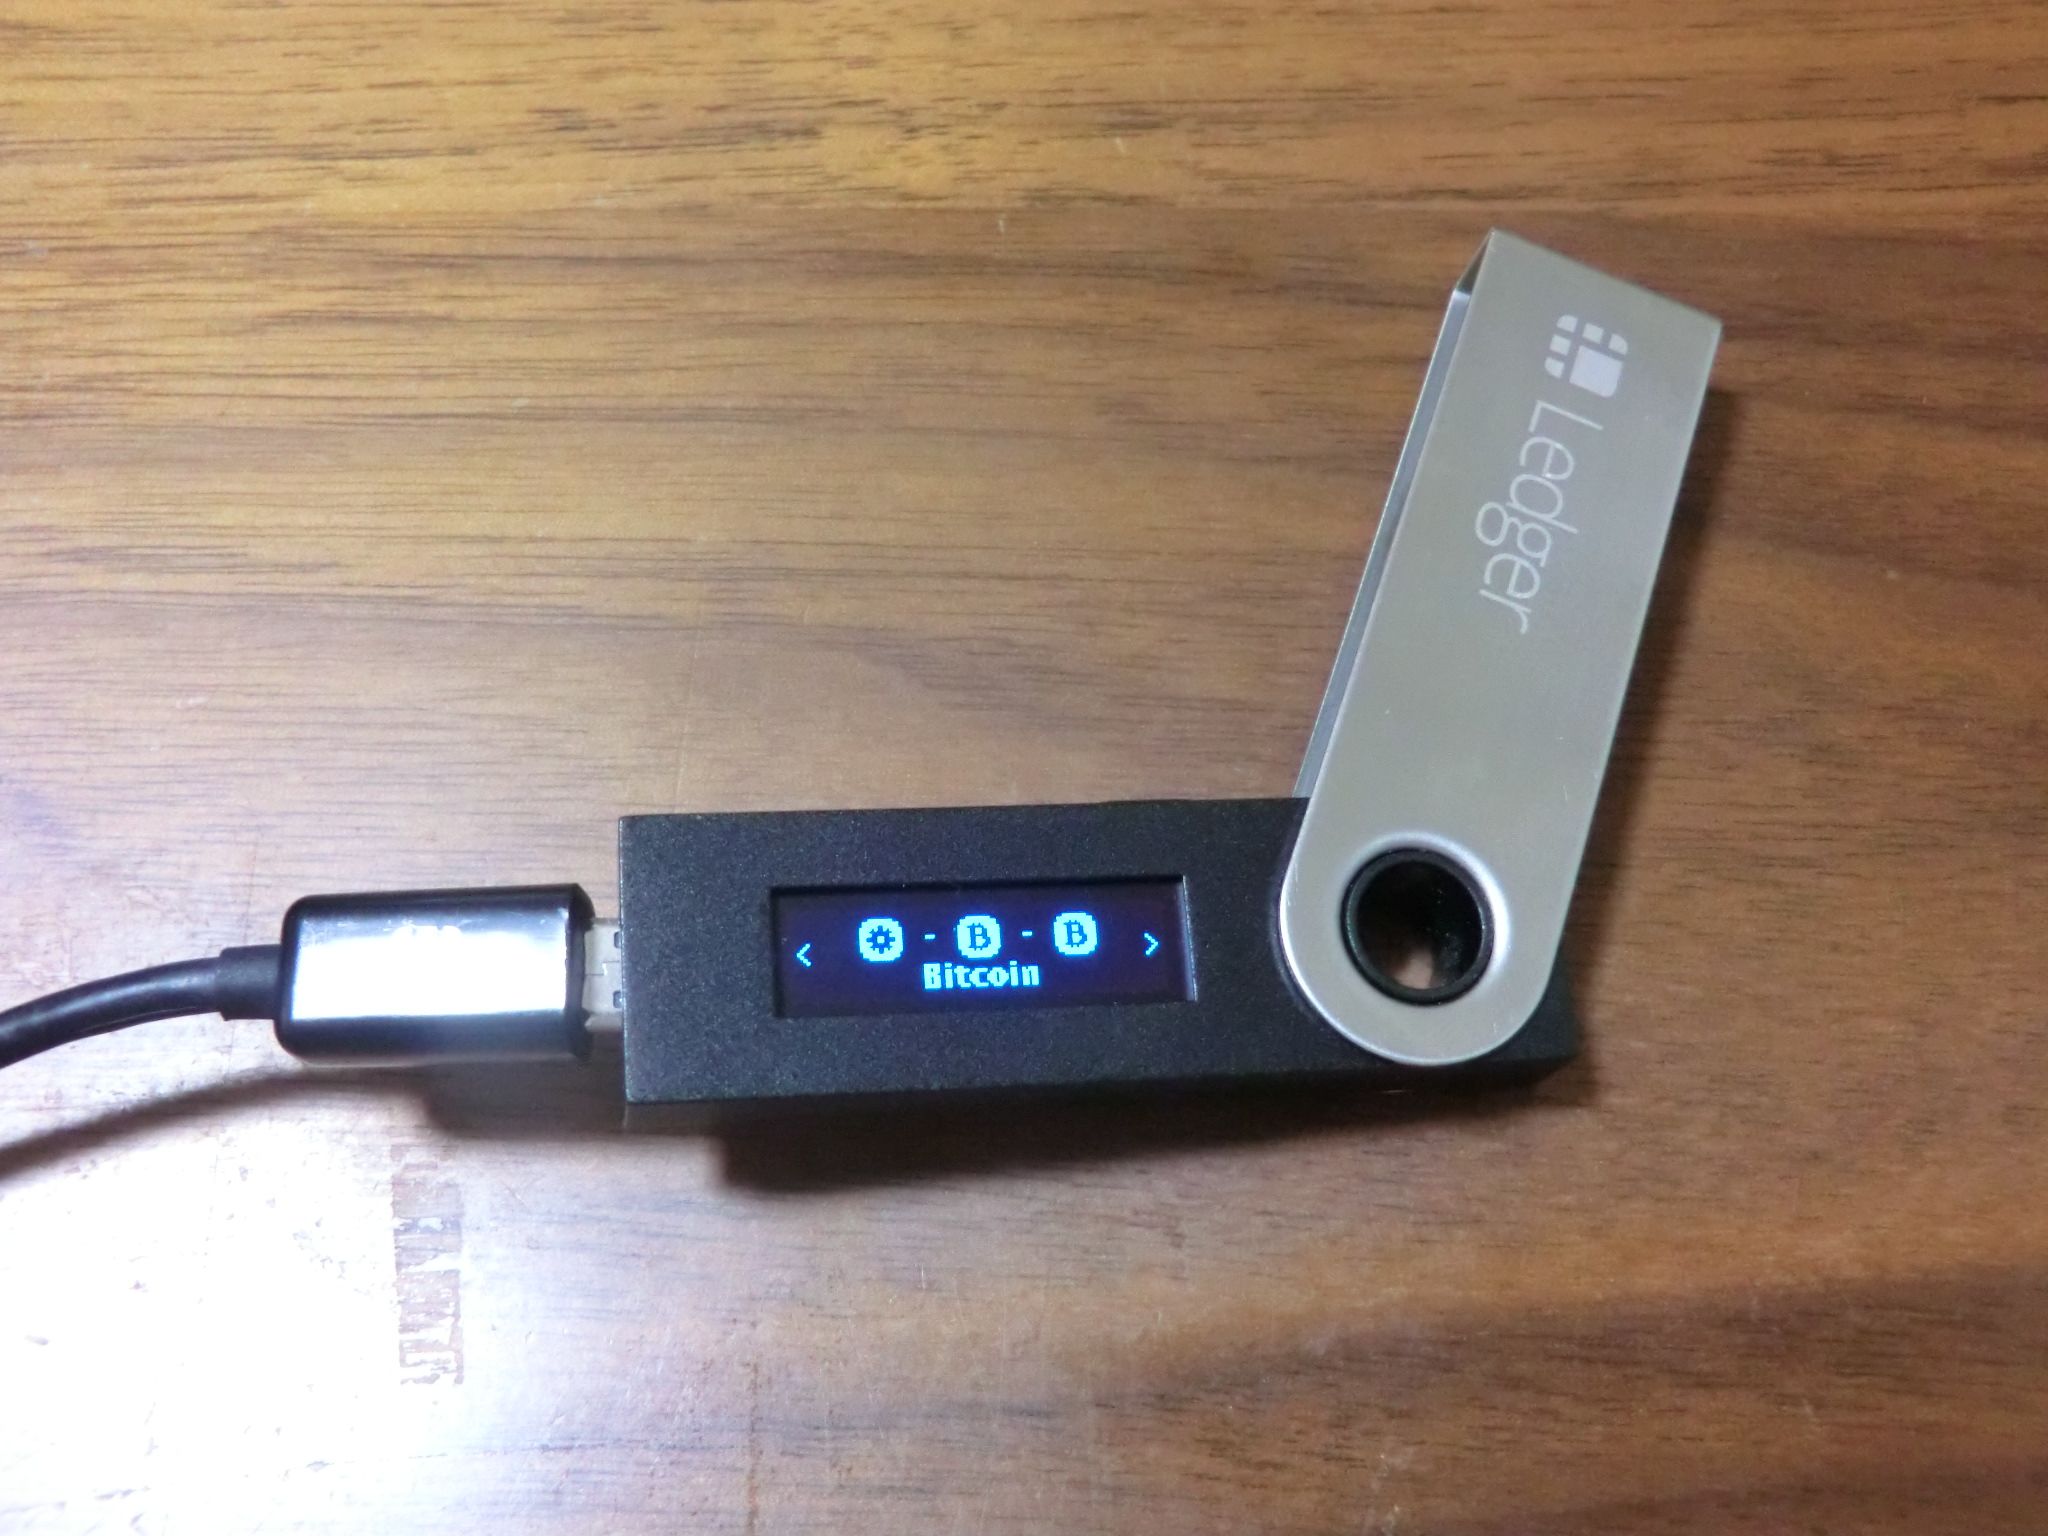 The ledger nano crypto wallet is seen on a brown surface